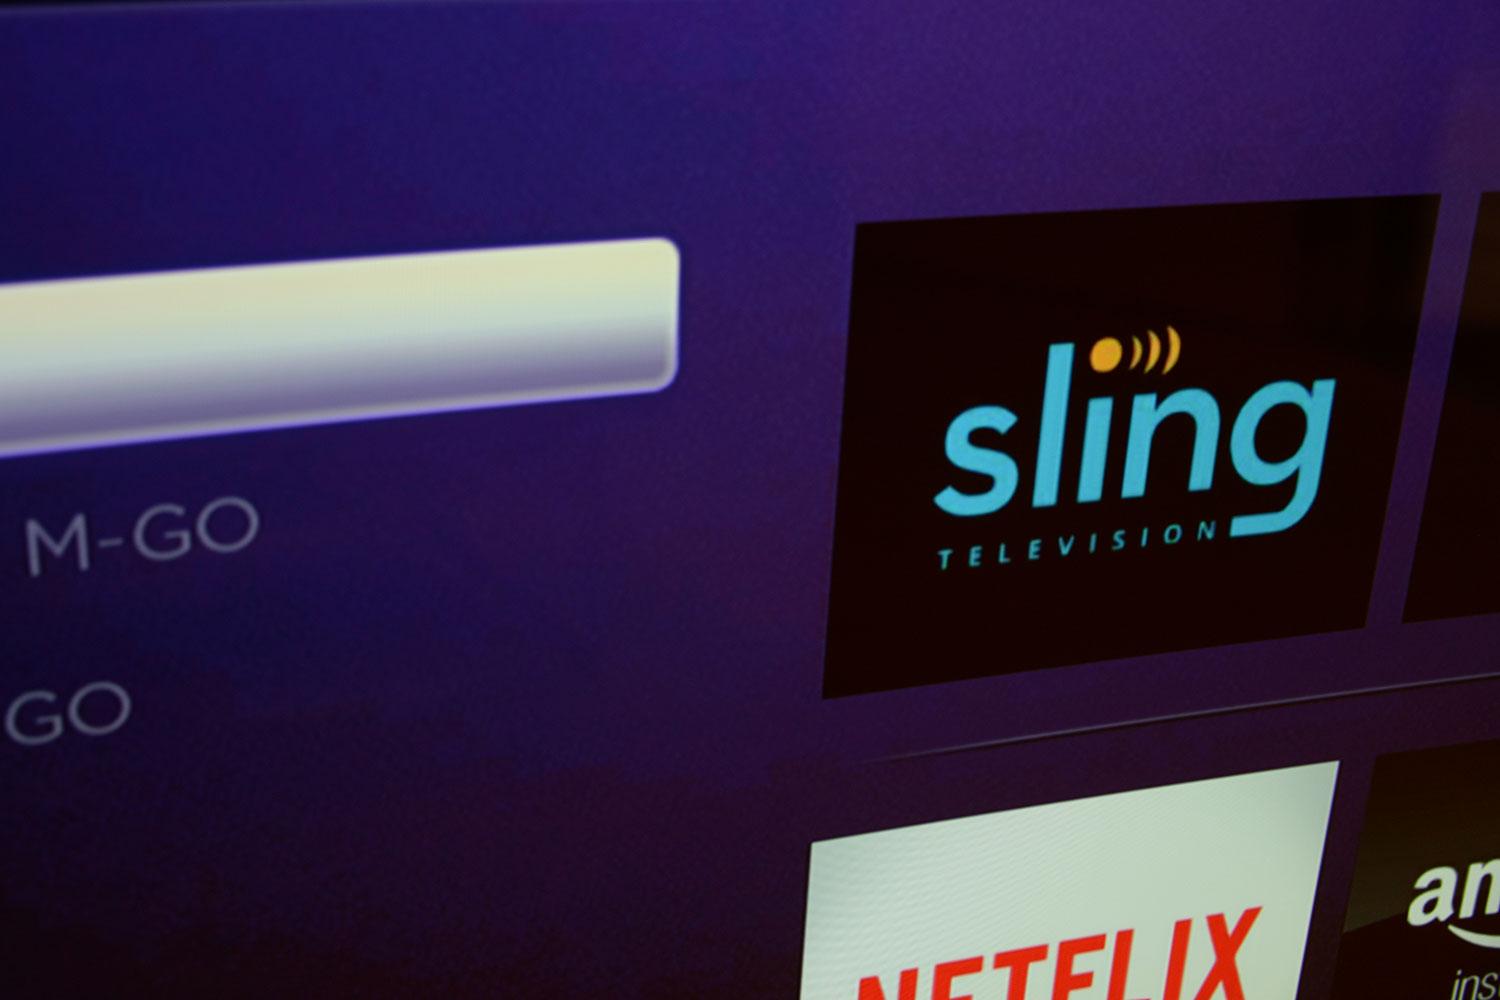 Sling TV adds thousands of new VOD titles in new deal Digital Trends